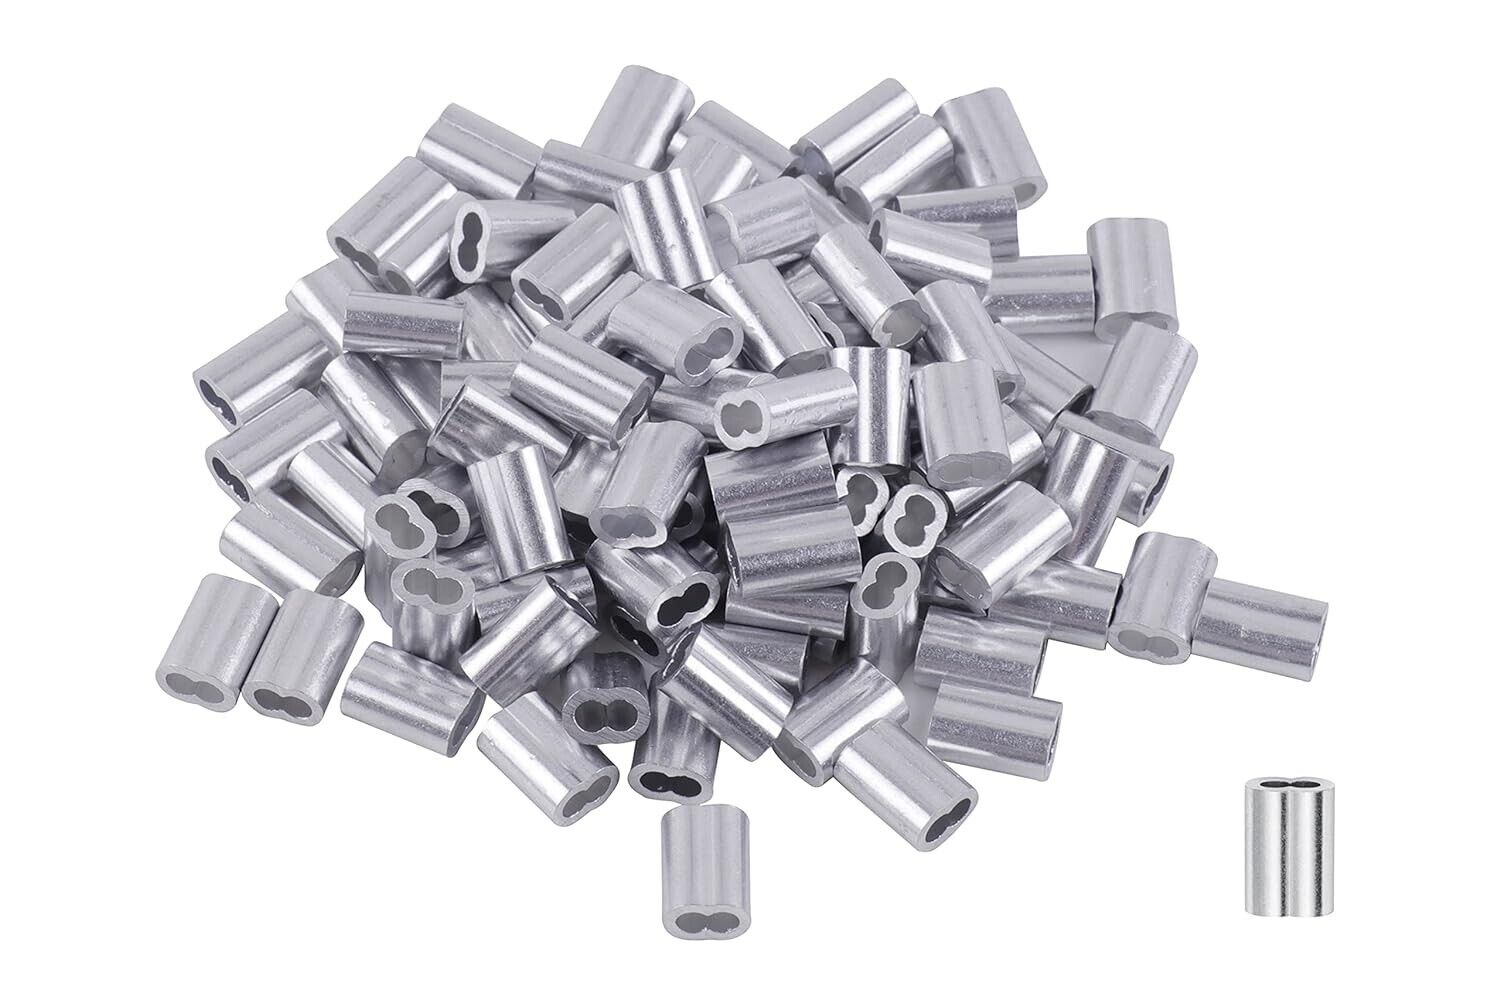 50PCS Aluminum Crimping Sleeve for Wire Rope Cable Ferrule Diameter 3/16